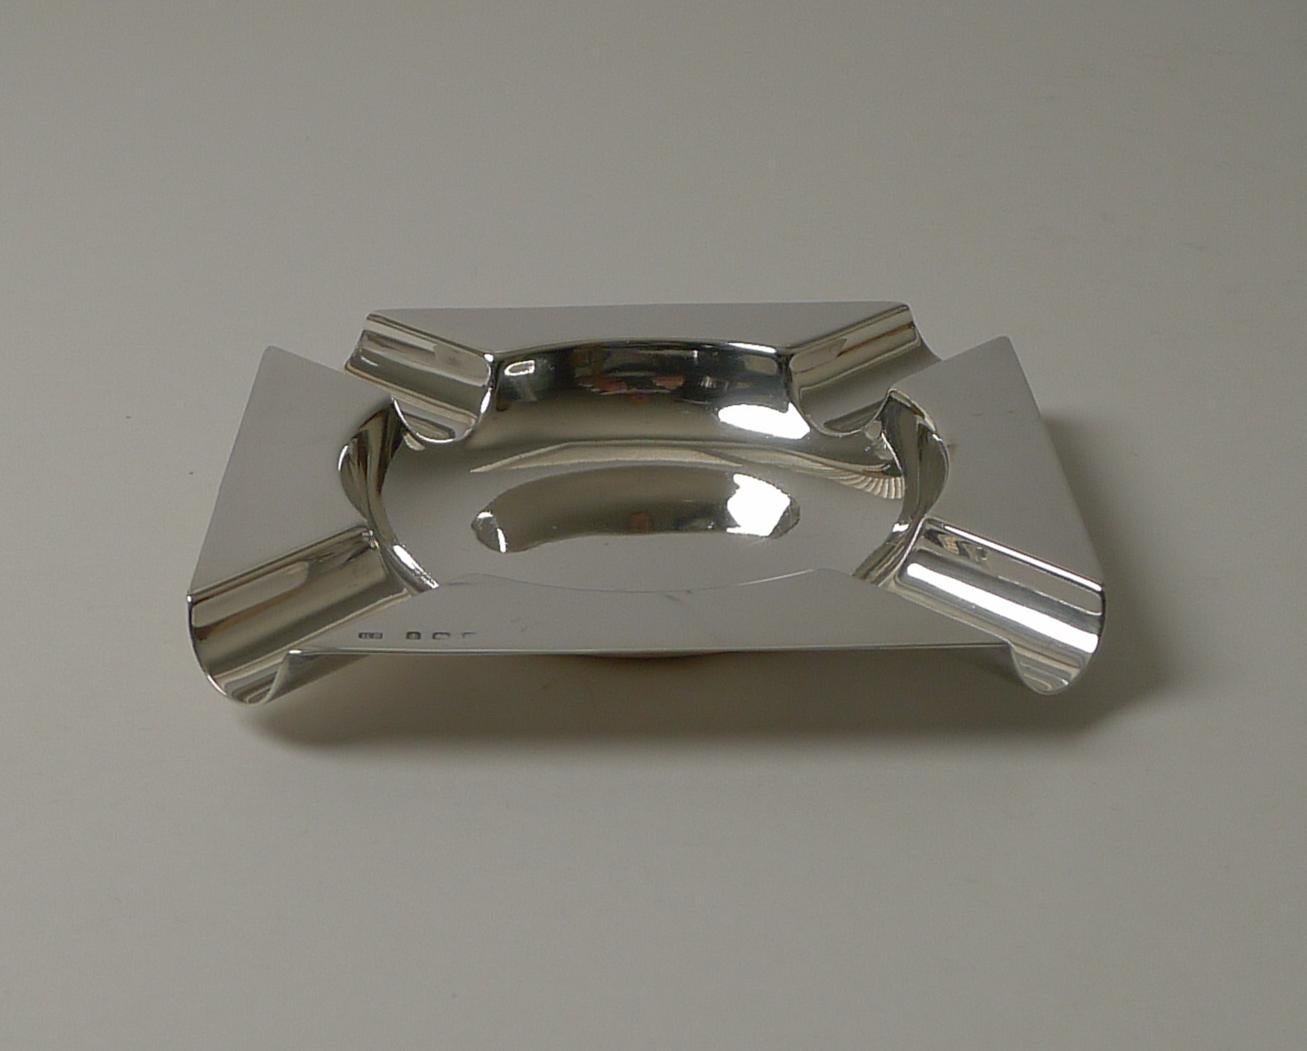 A lovely quality vintage solid silver ashtray, a good solid piece with a good weight @ 95.5 Grams / 3.07 Troy Ounces.

Fully hallmarked for Birmingham 1928, nearly 100 years old; the maker mark is also present for Spencer and Co. 

Excellent